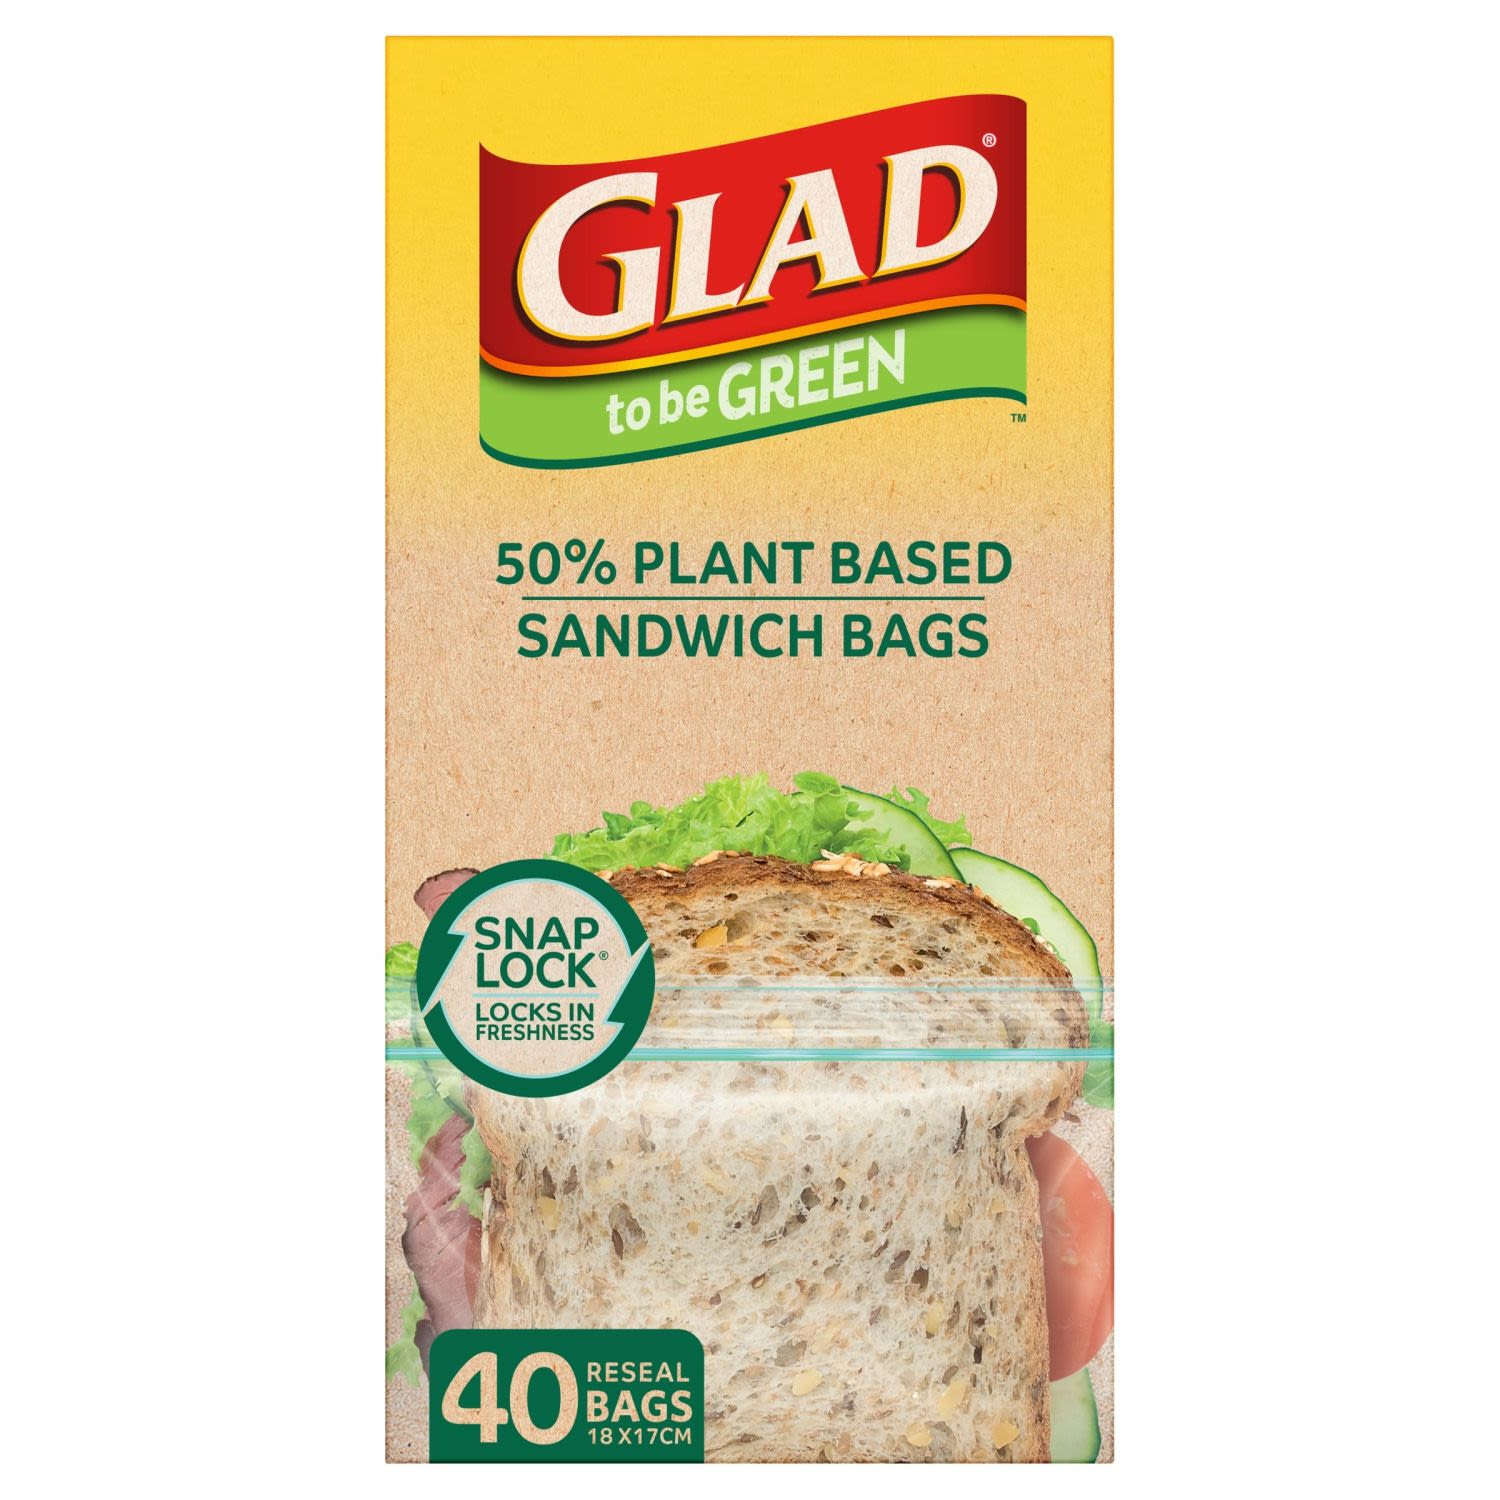 Glad to be Green 50% Plant Based Sandwich Bags, 40 Each